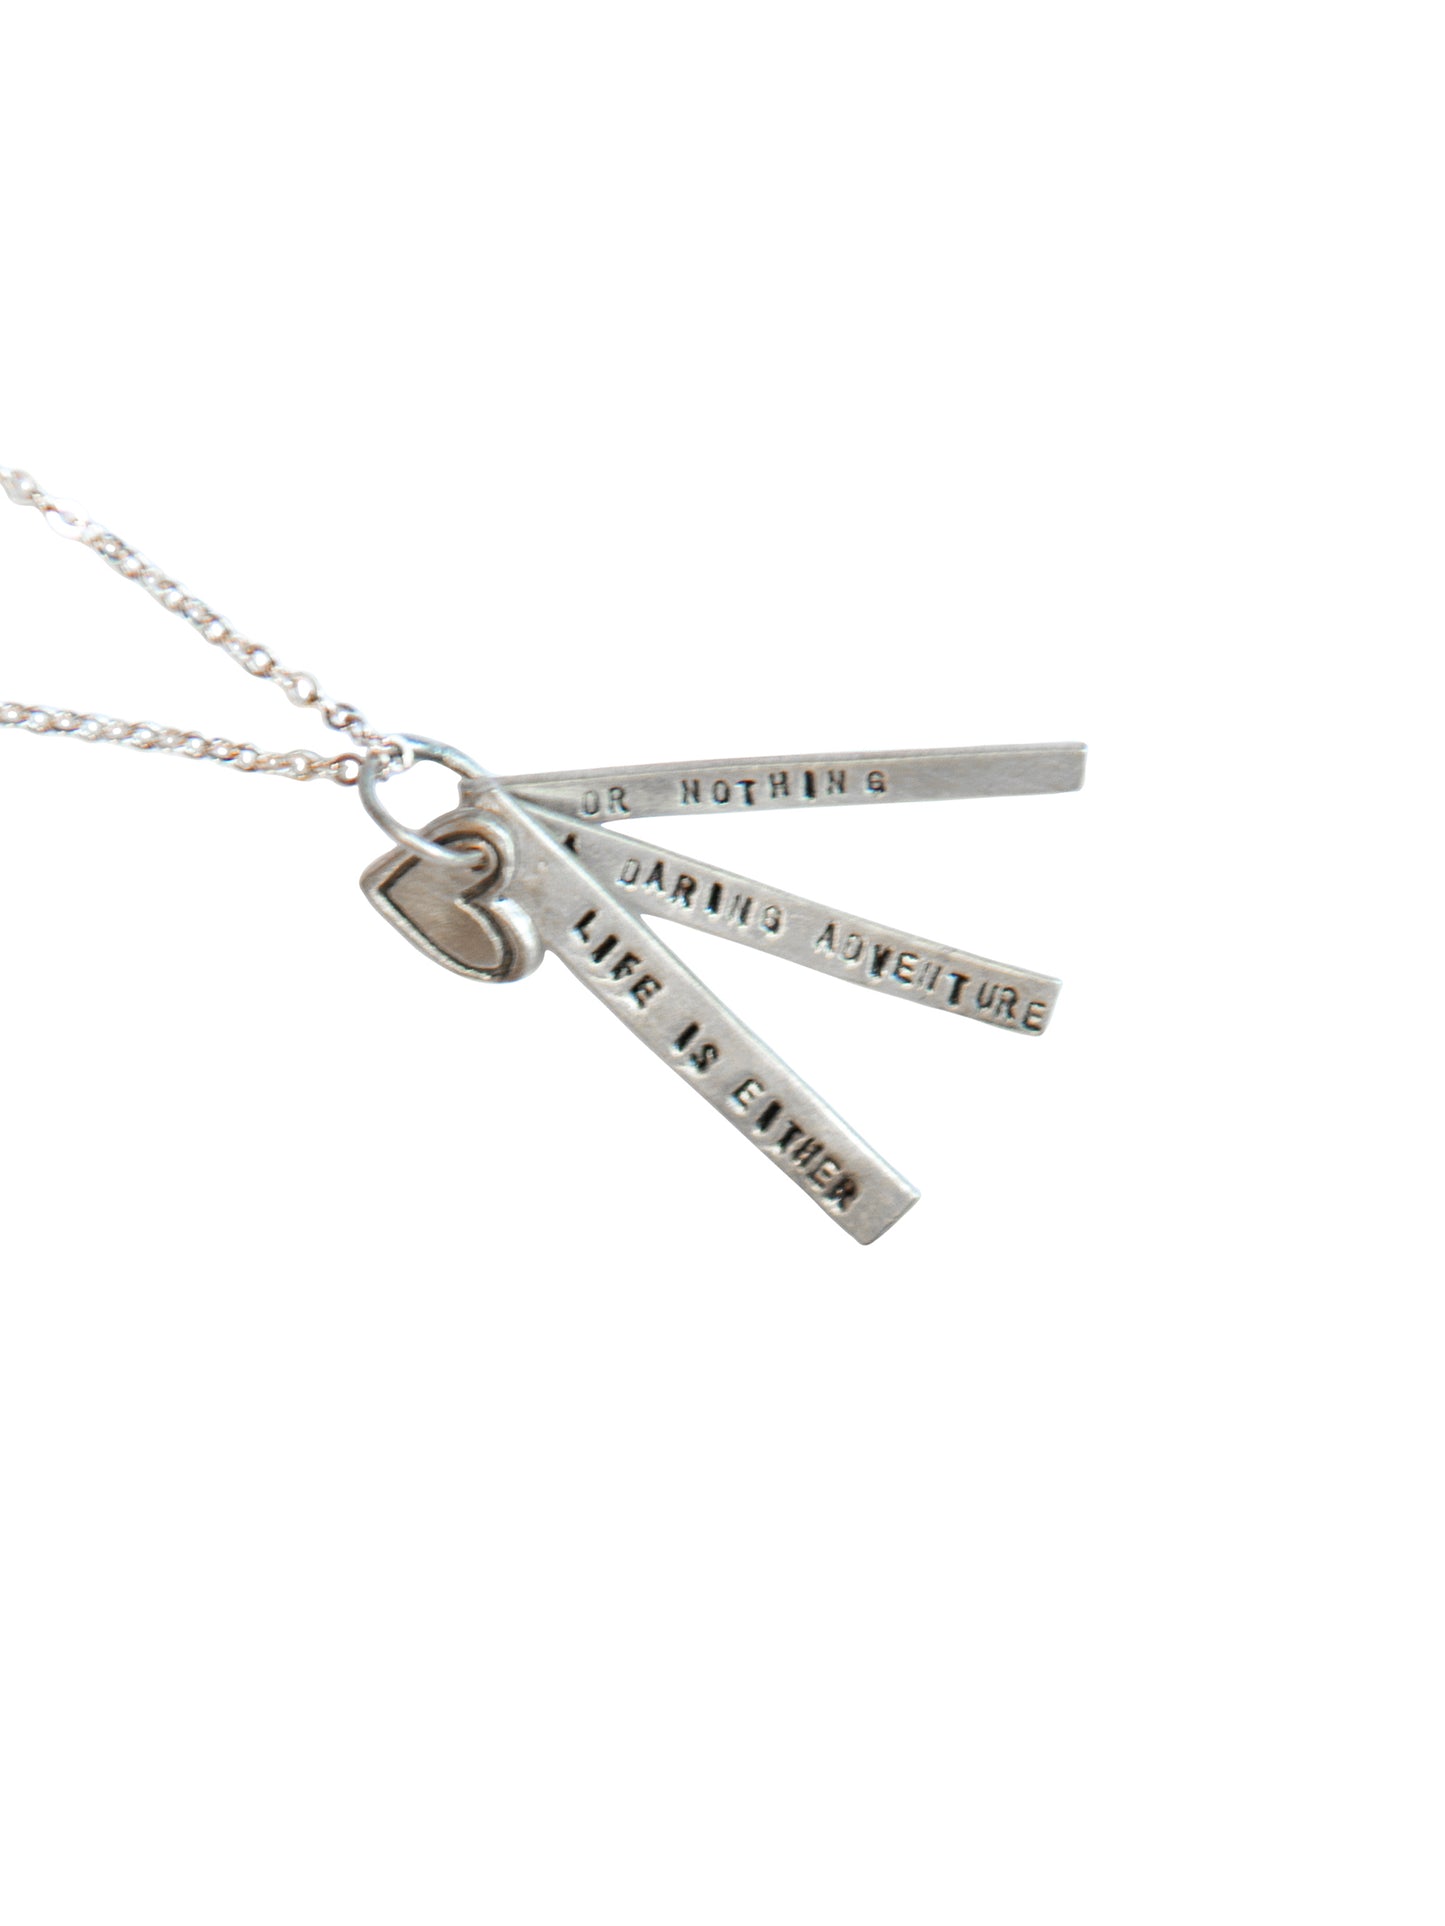 Chocolate & Steel Long-Bar Quote Necklace Helen Keller Silver Weston Table